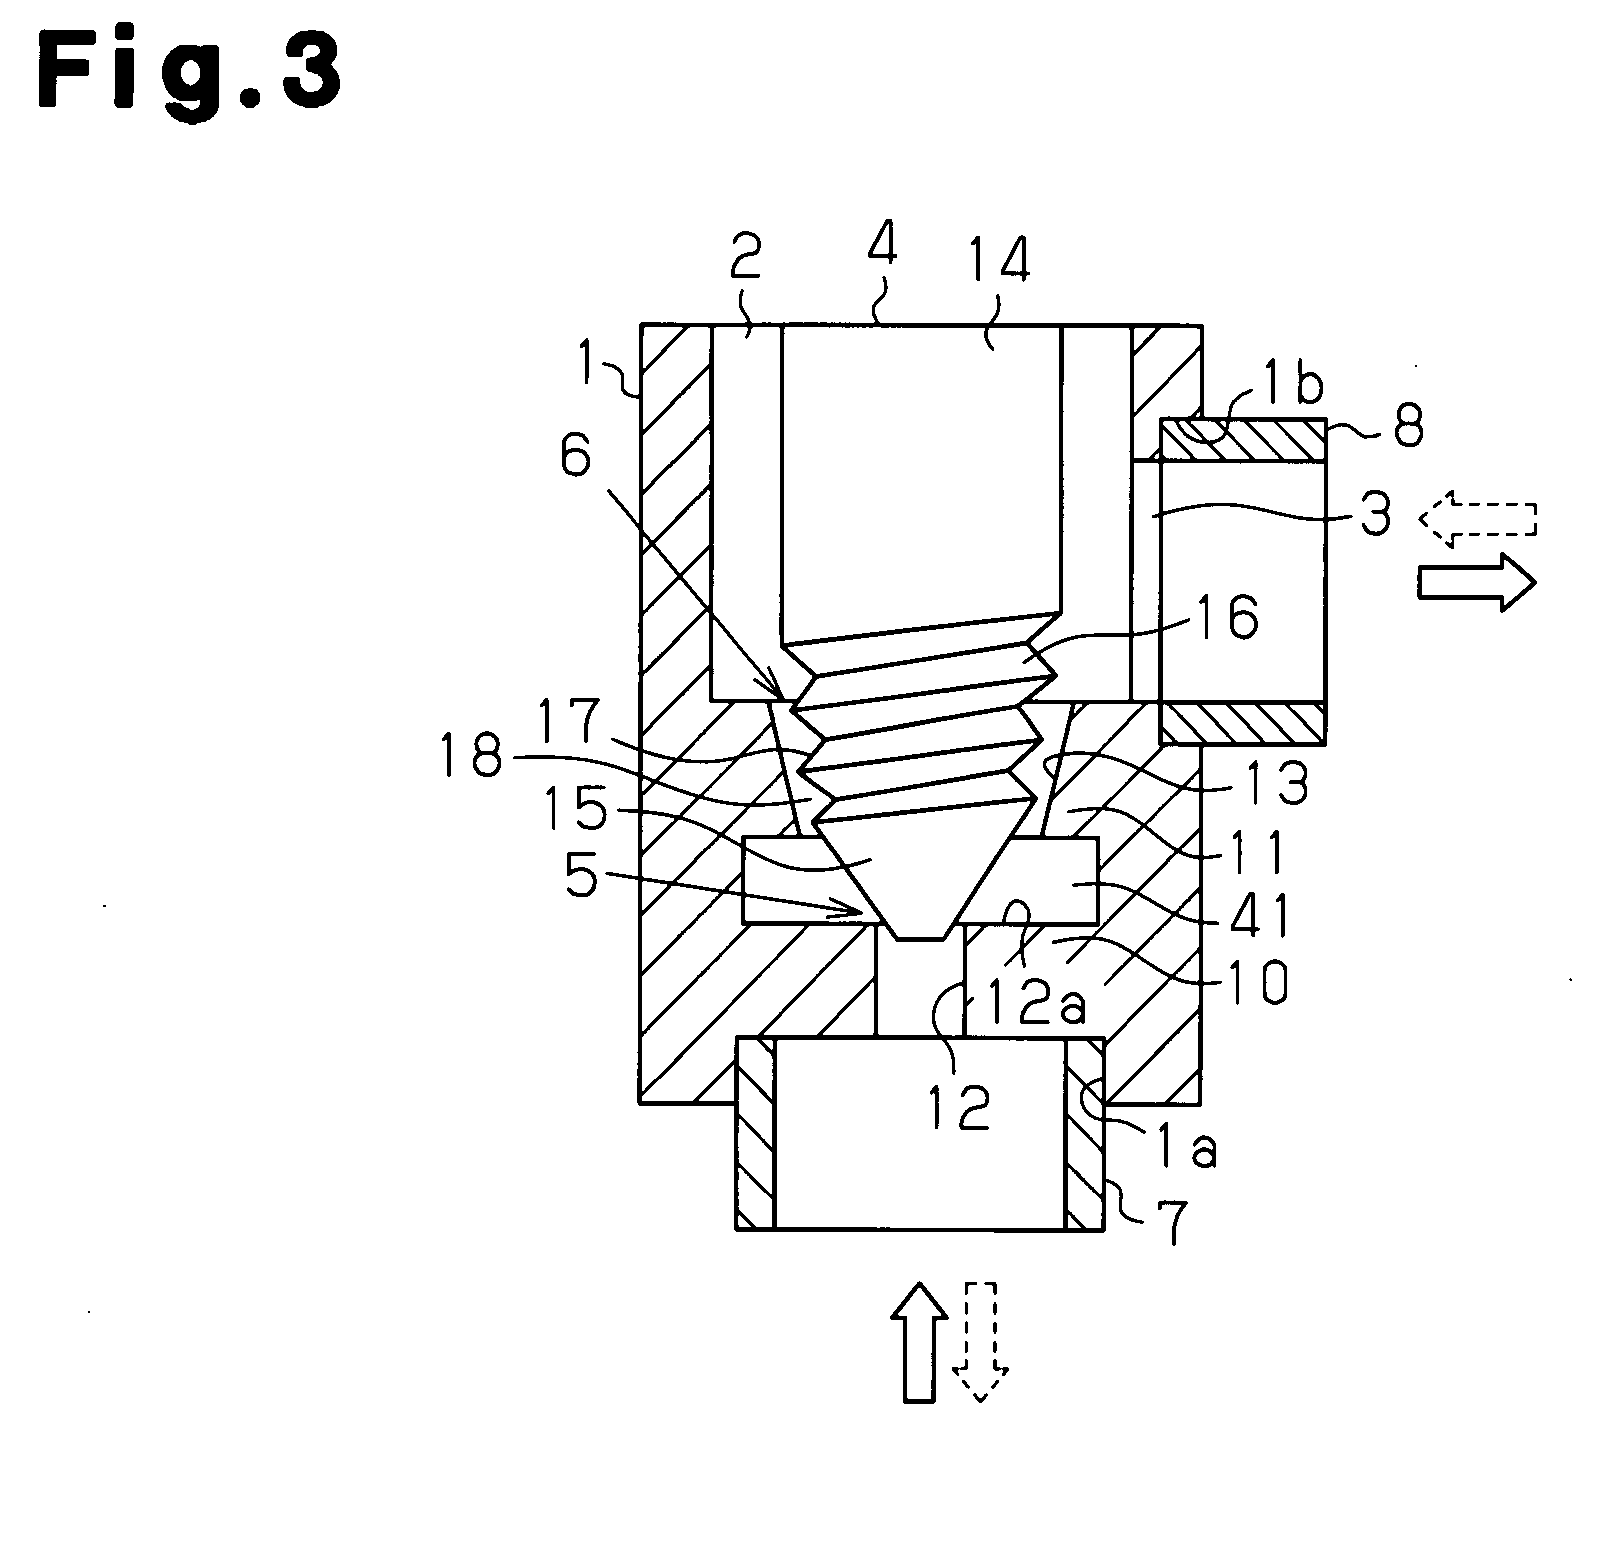 Expansion Valve and Refrigeration Device